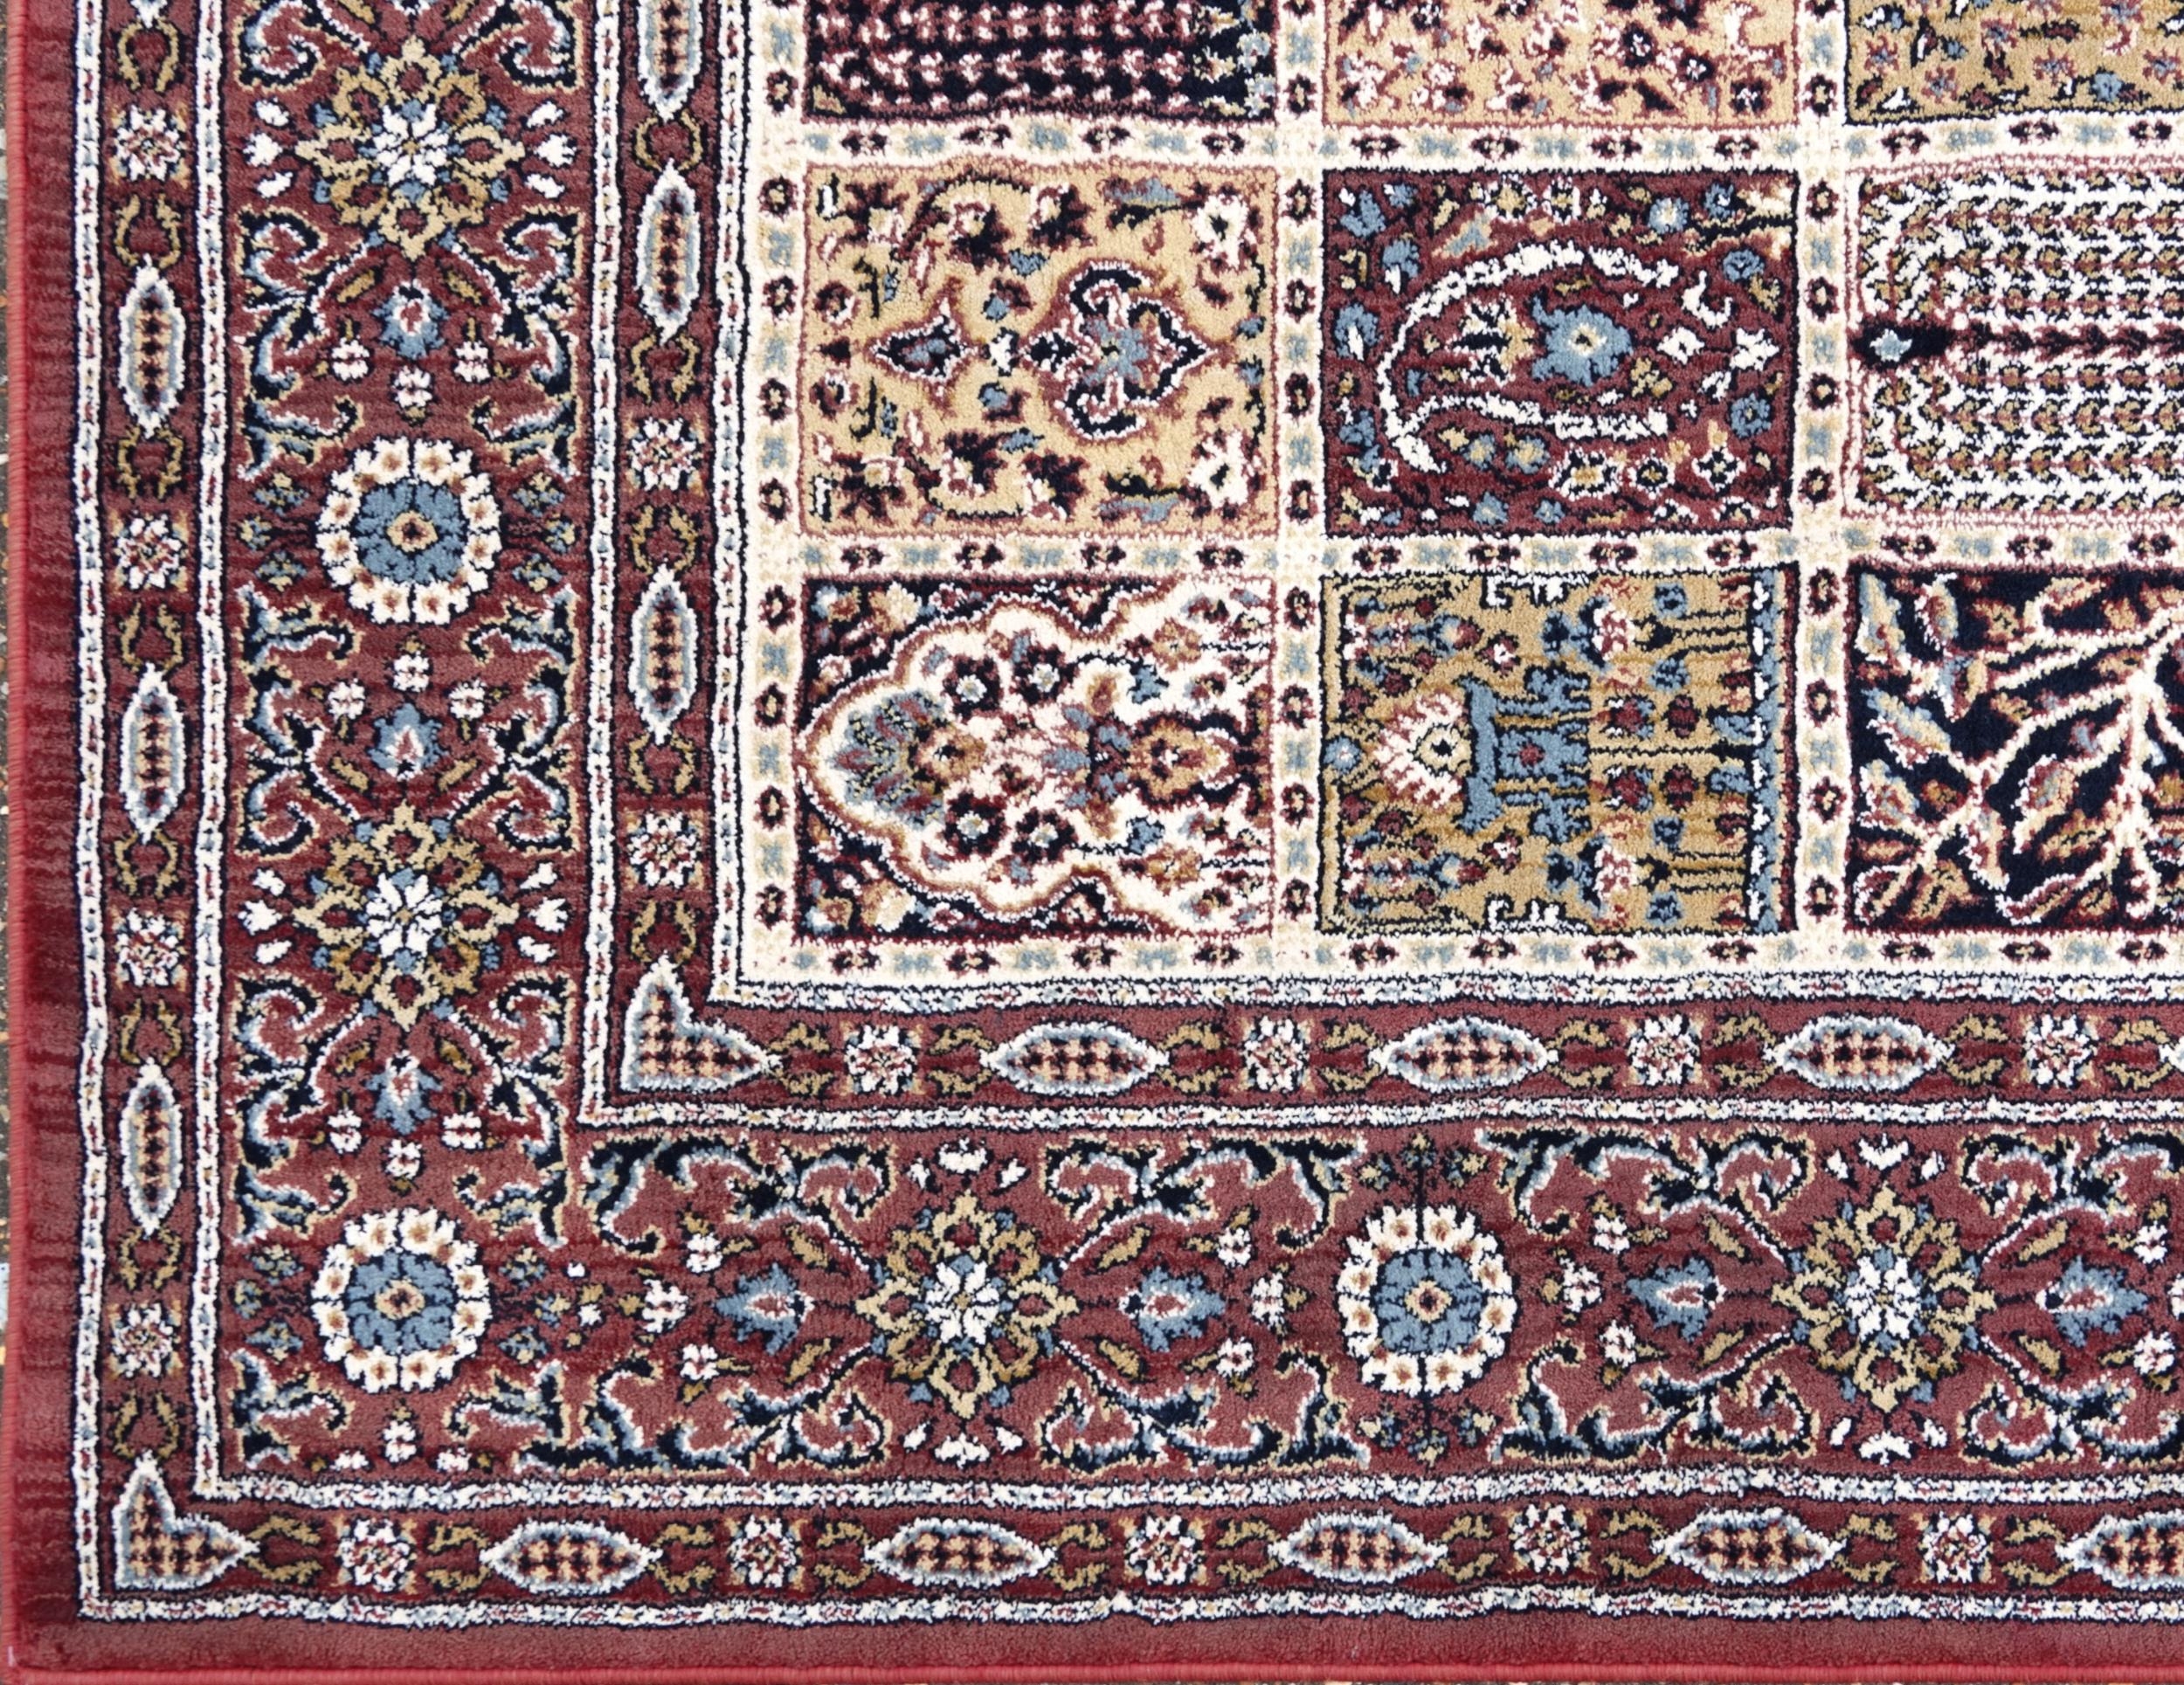 Pair of rectangular Persian style Valby Ruta rugs, each 195cm x 133cm - Image 5 of 13